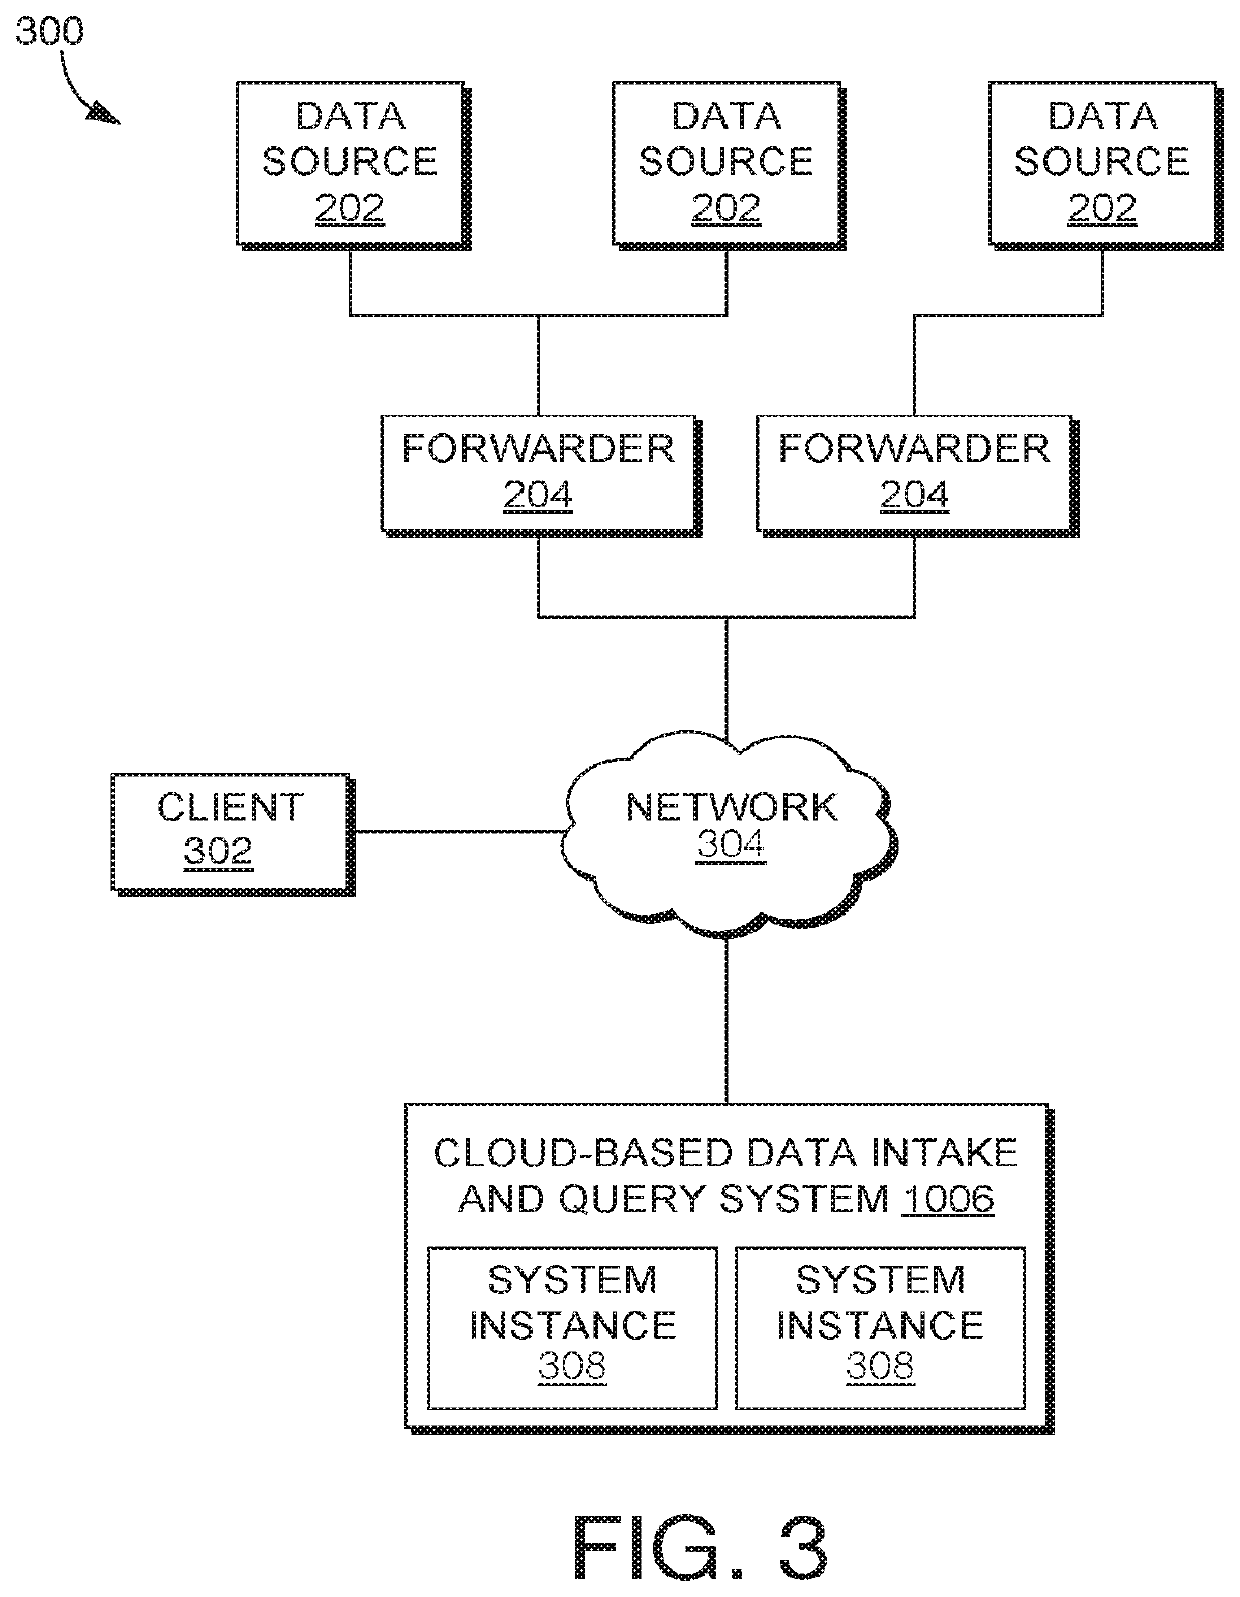 Conversion of cloud computing platform data for ingestion by data intake and query system